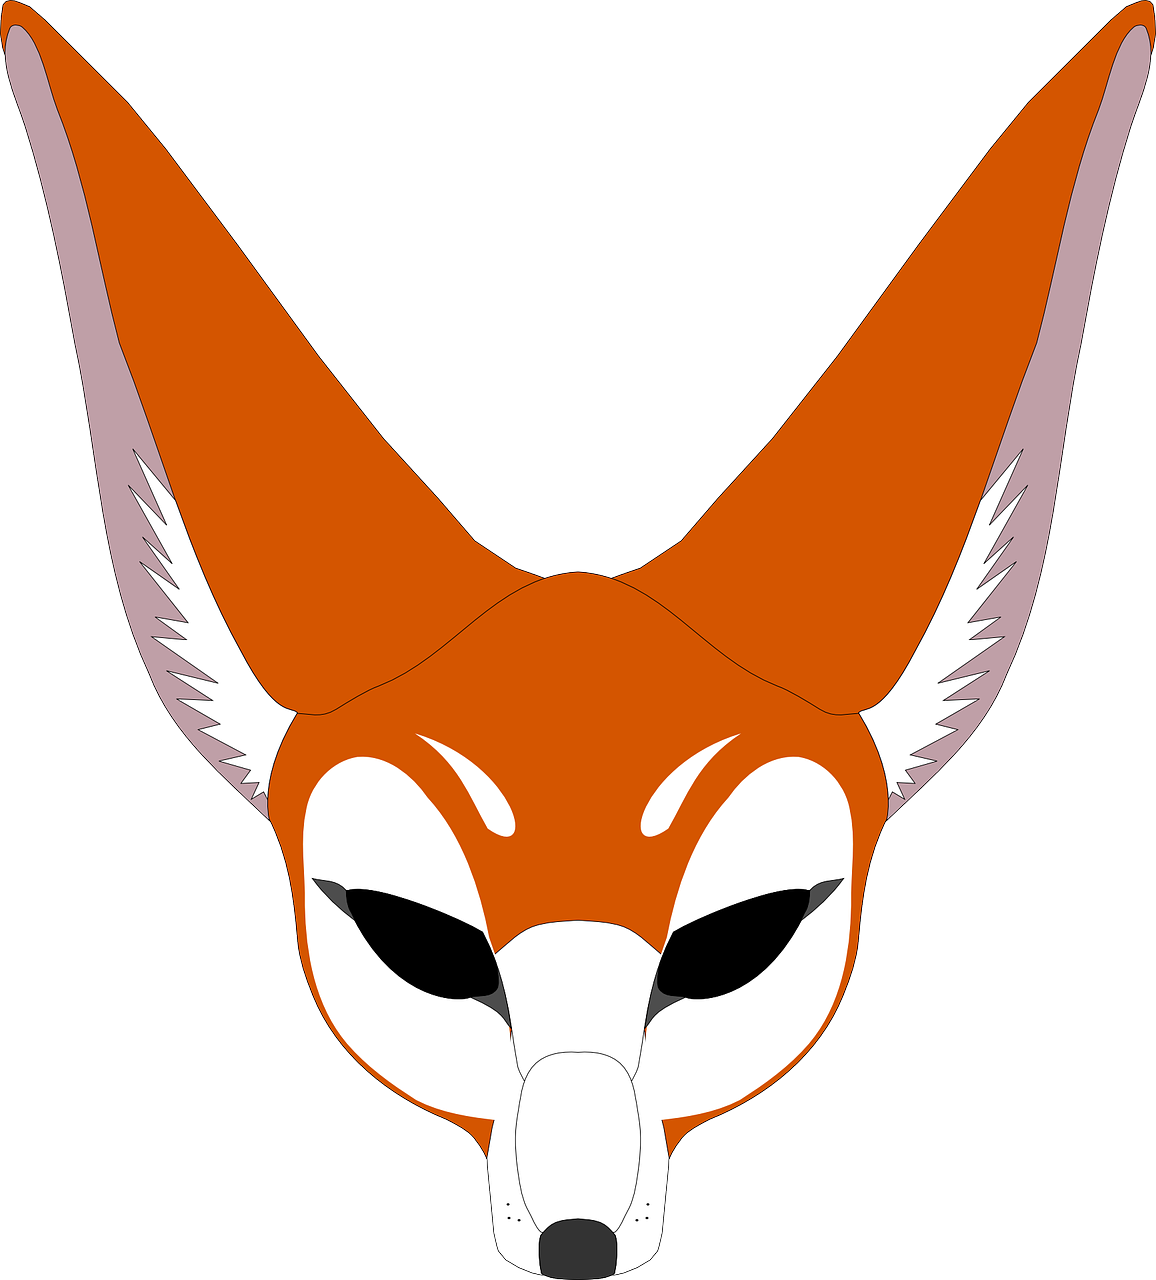 Stylized Coyote Head Illustration PNG